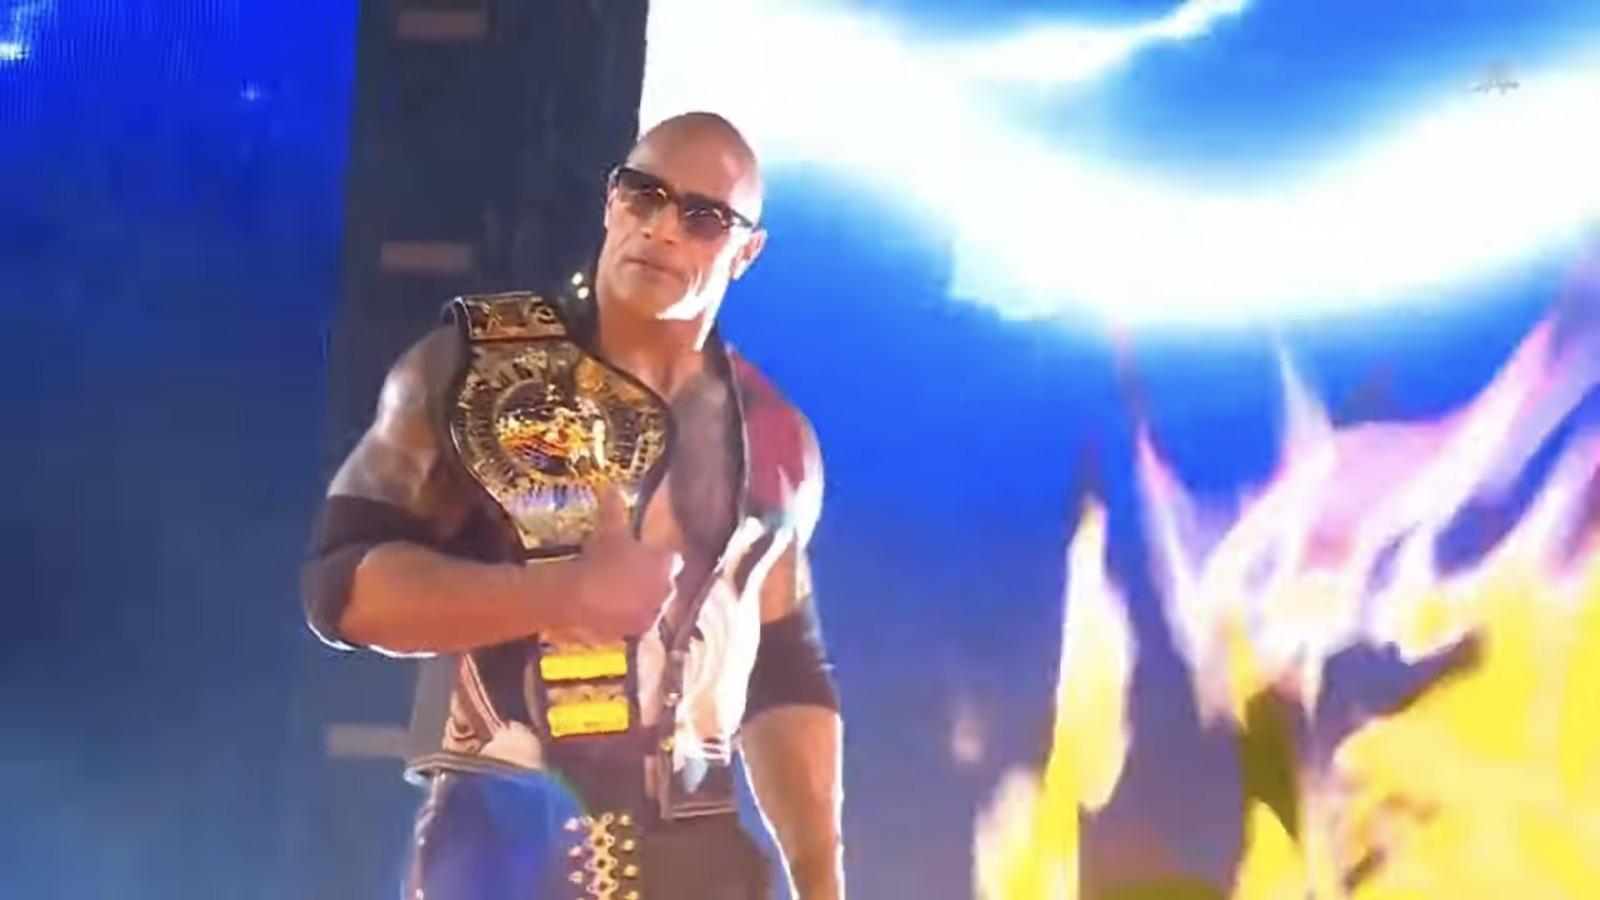 The Rock threatened to fire a WWE referee during his Wrestlemania 40 match